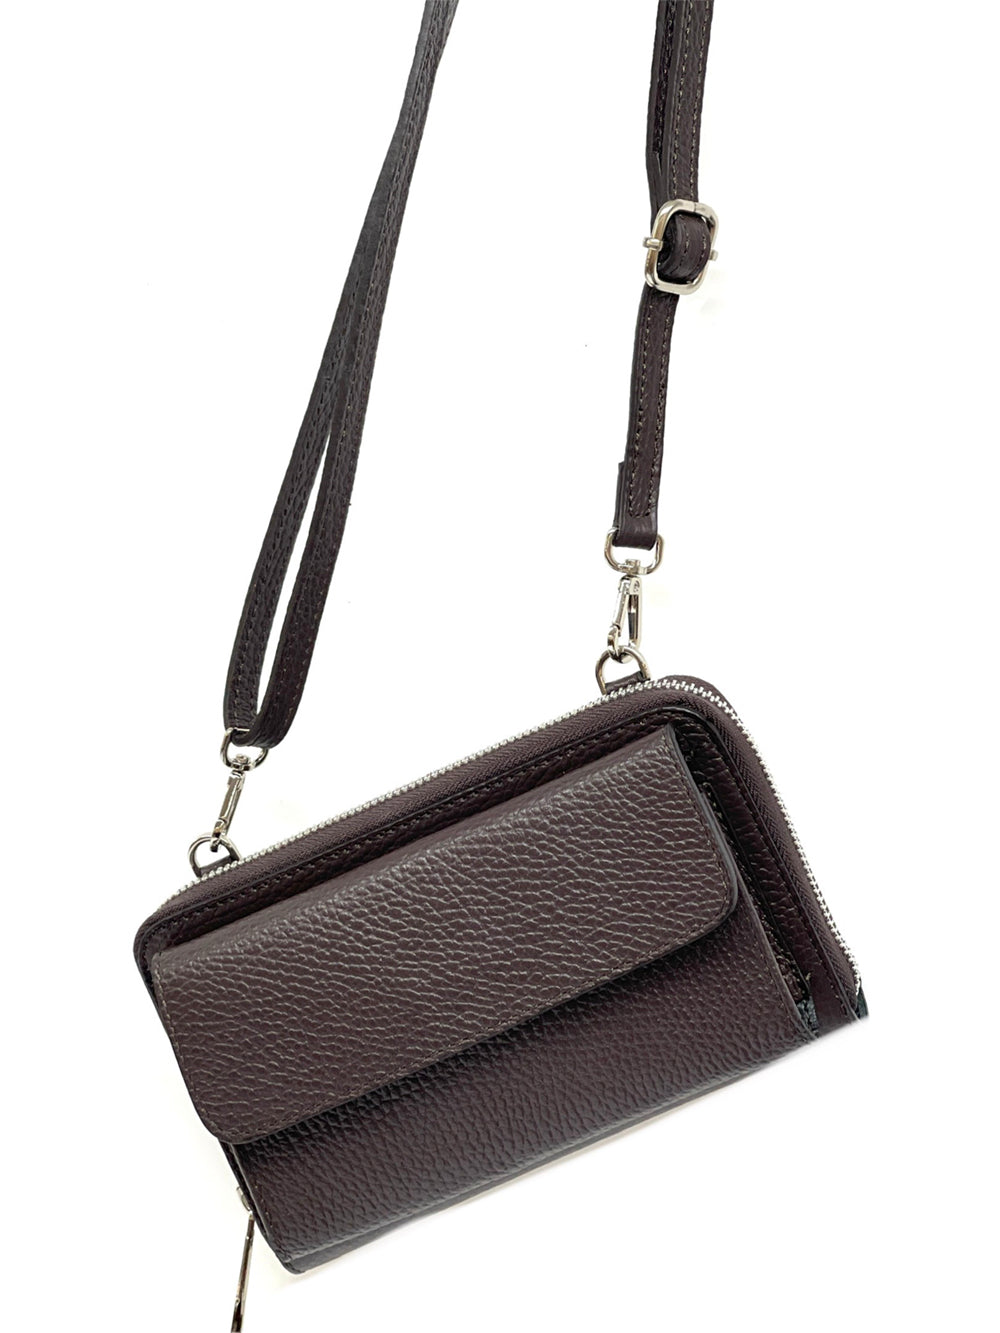 brown leather phone case showing adjustable shoulder strap and fittings - Ava